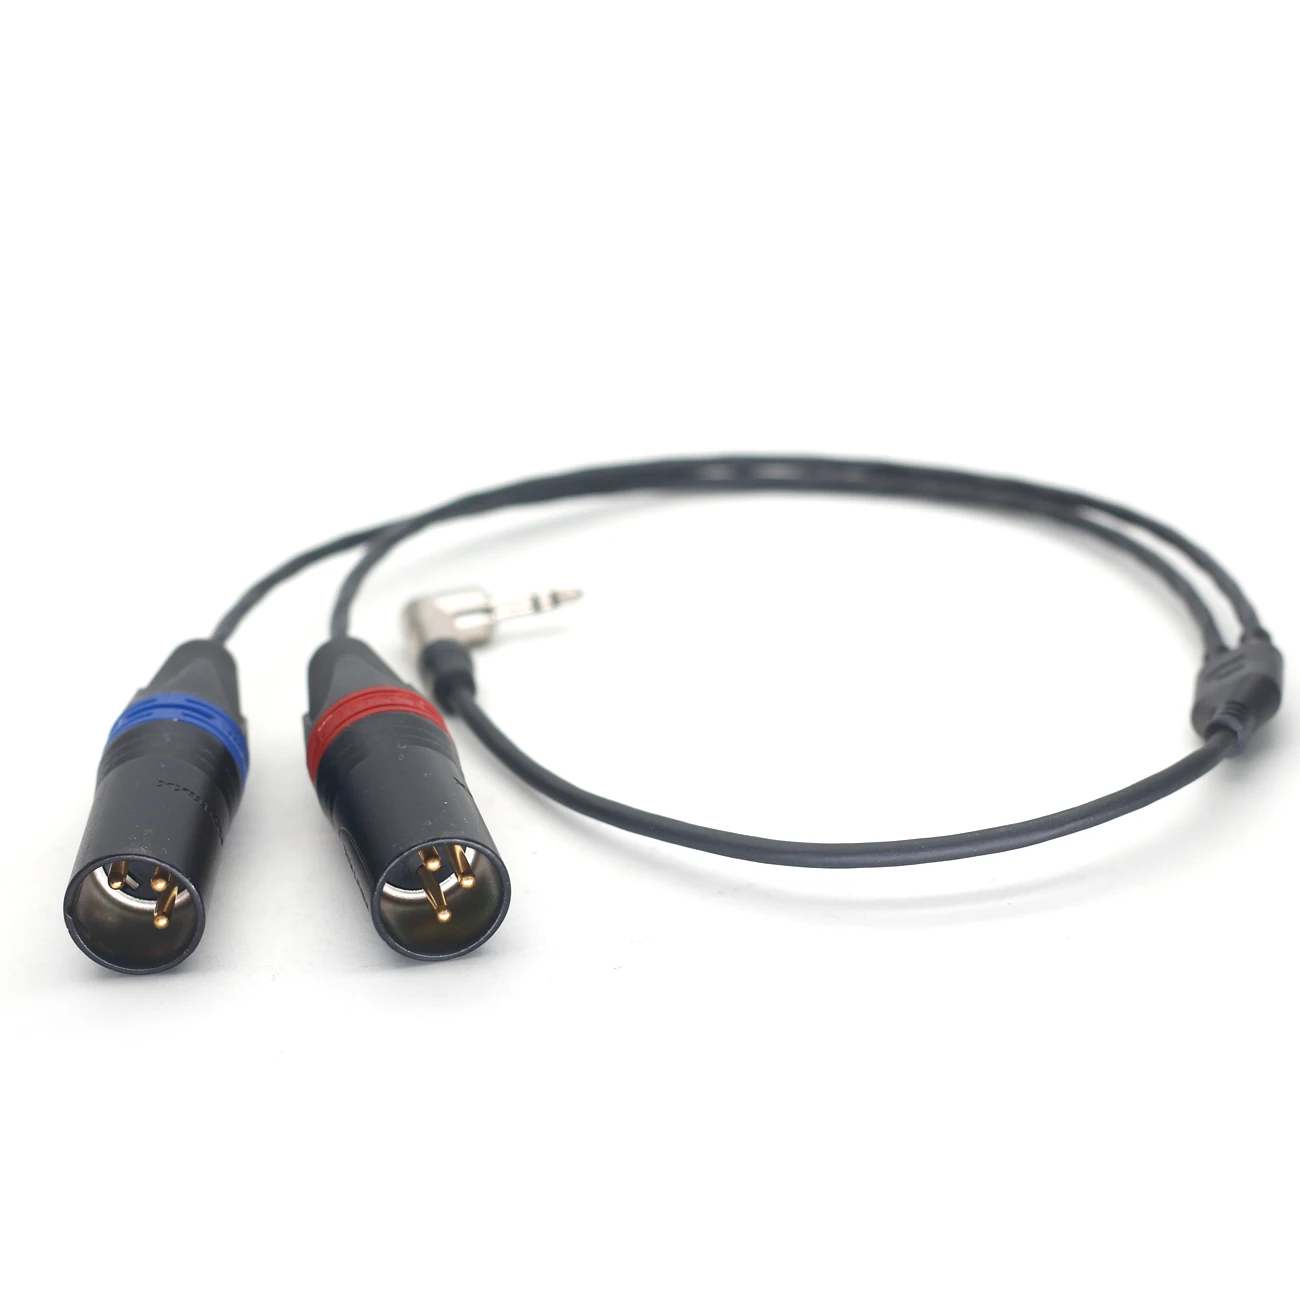 

3.5 Audio Plug to double XLR 3-Pin male For The Atomos audio cables are connected to the Zaxcom IFB unbalanced audio outputs.